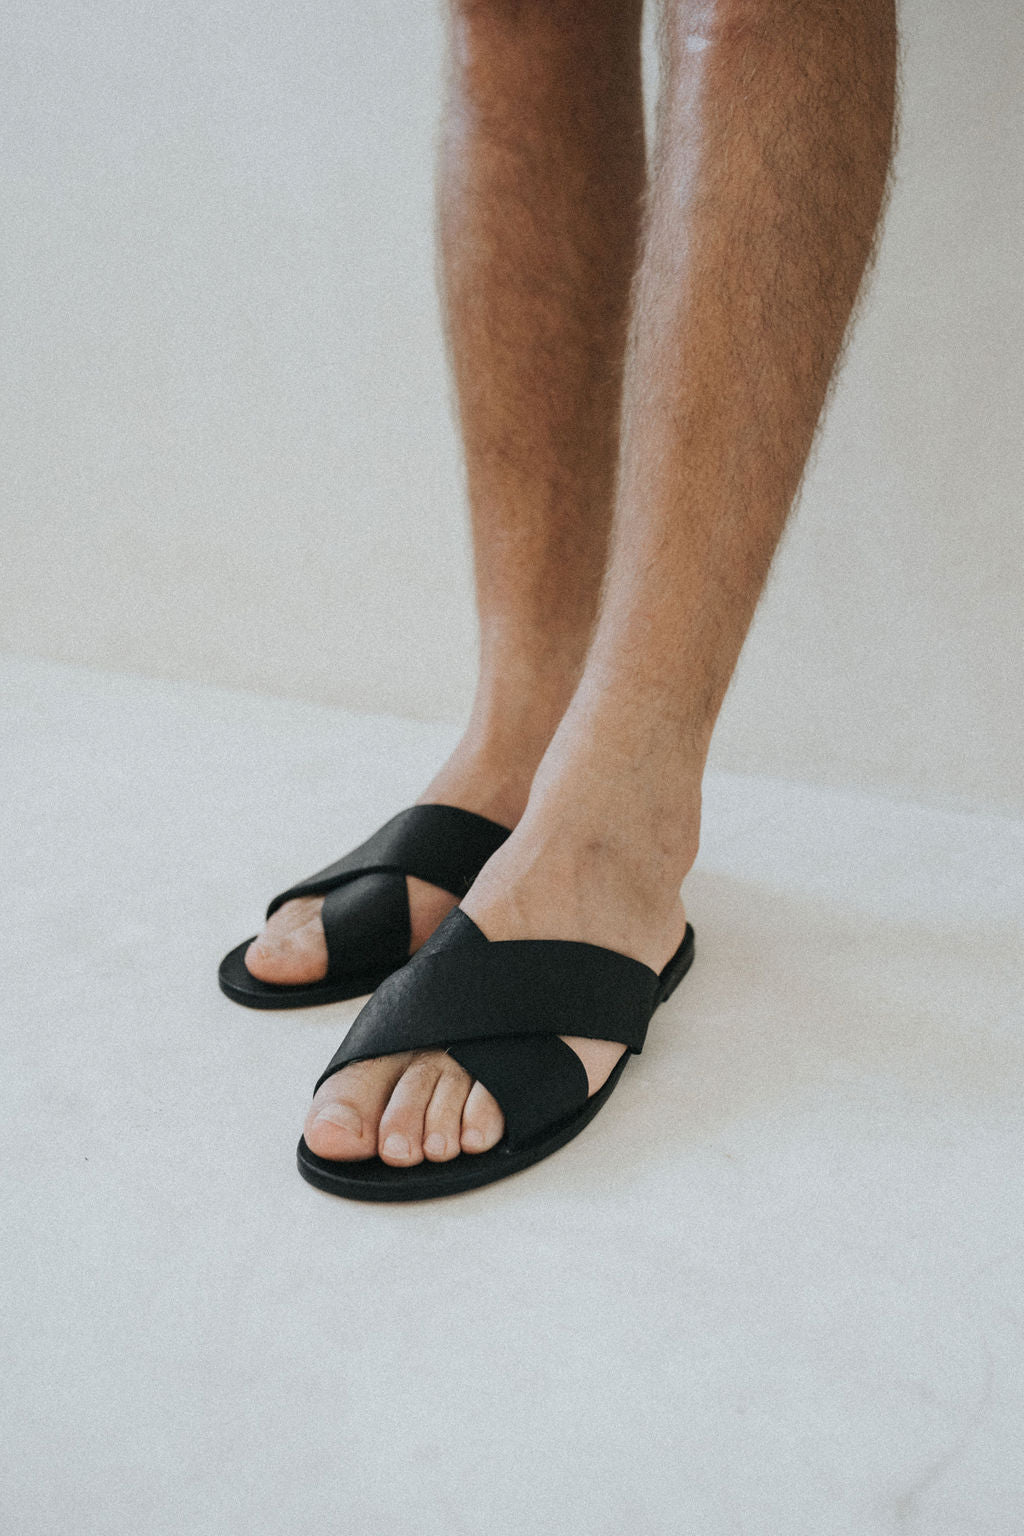 5 Fashion Faux Pas To Avoid To Work This Summer | Mens leather sandals, Mens  sandals fashion, Stylish sandals